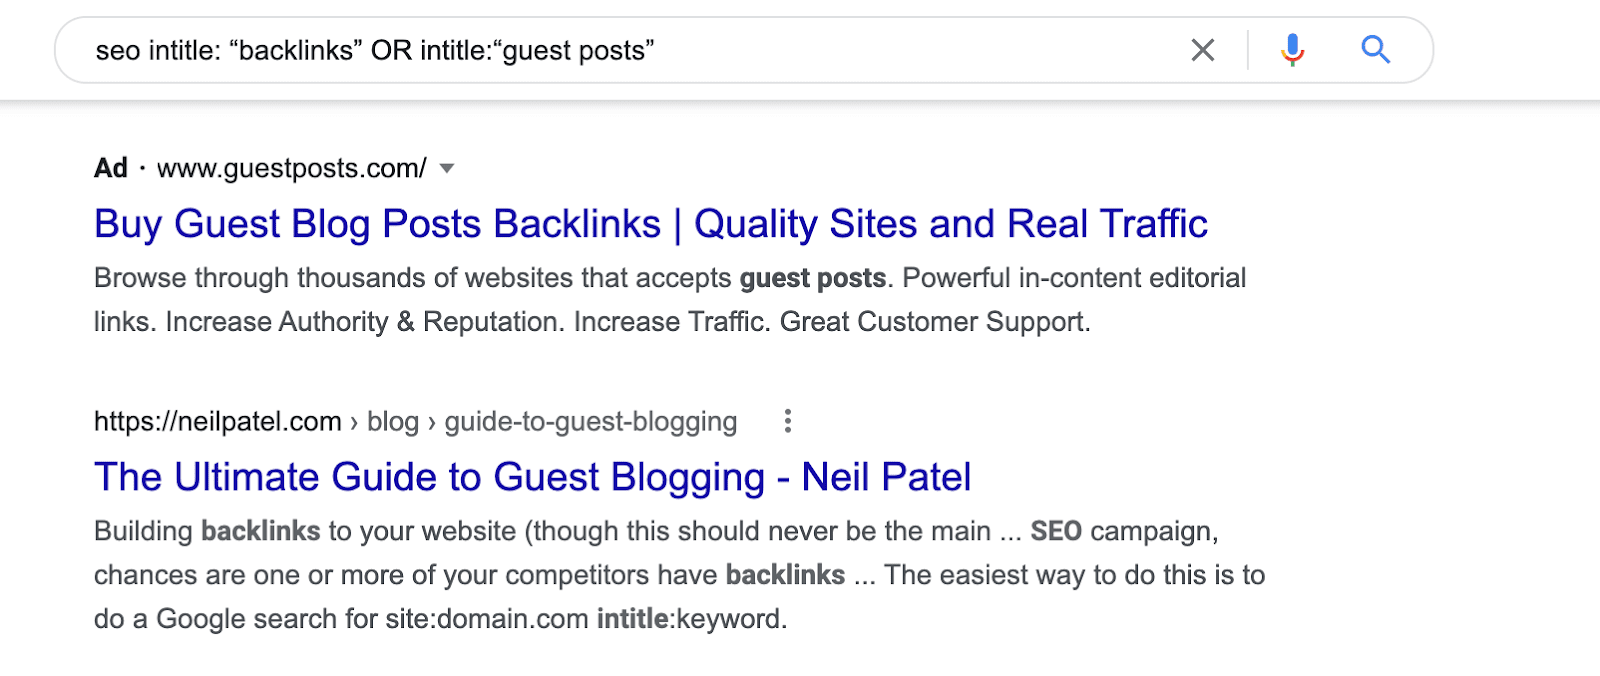 seo intitle: “backlinks” OR intitle:“guest posts”